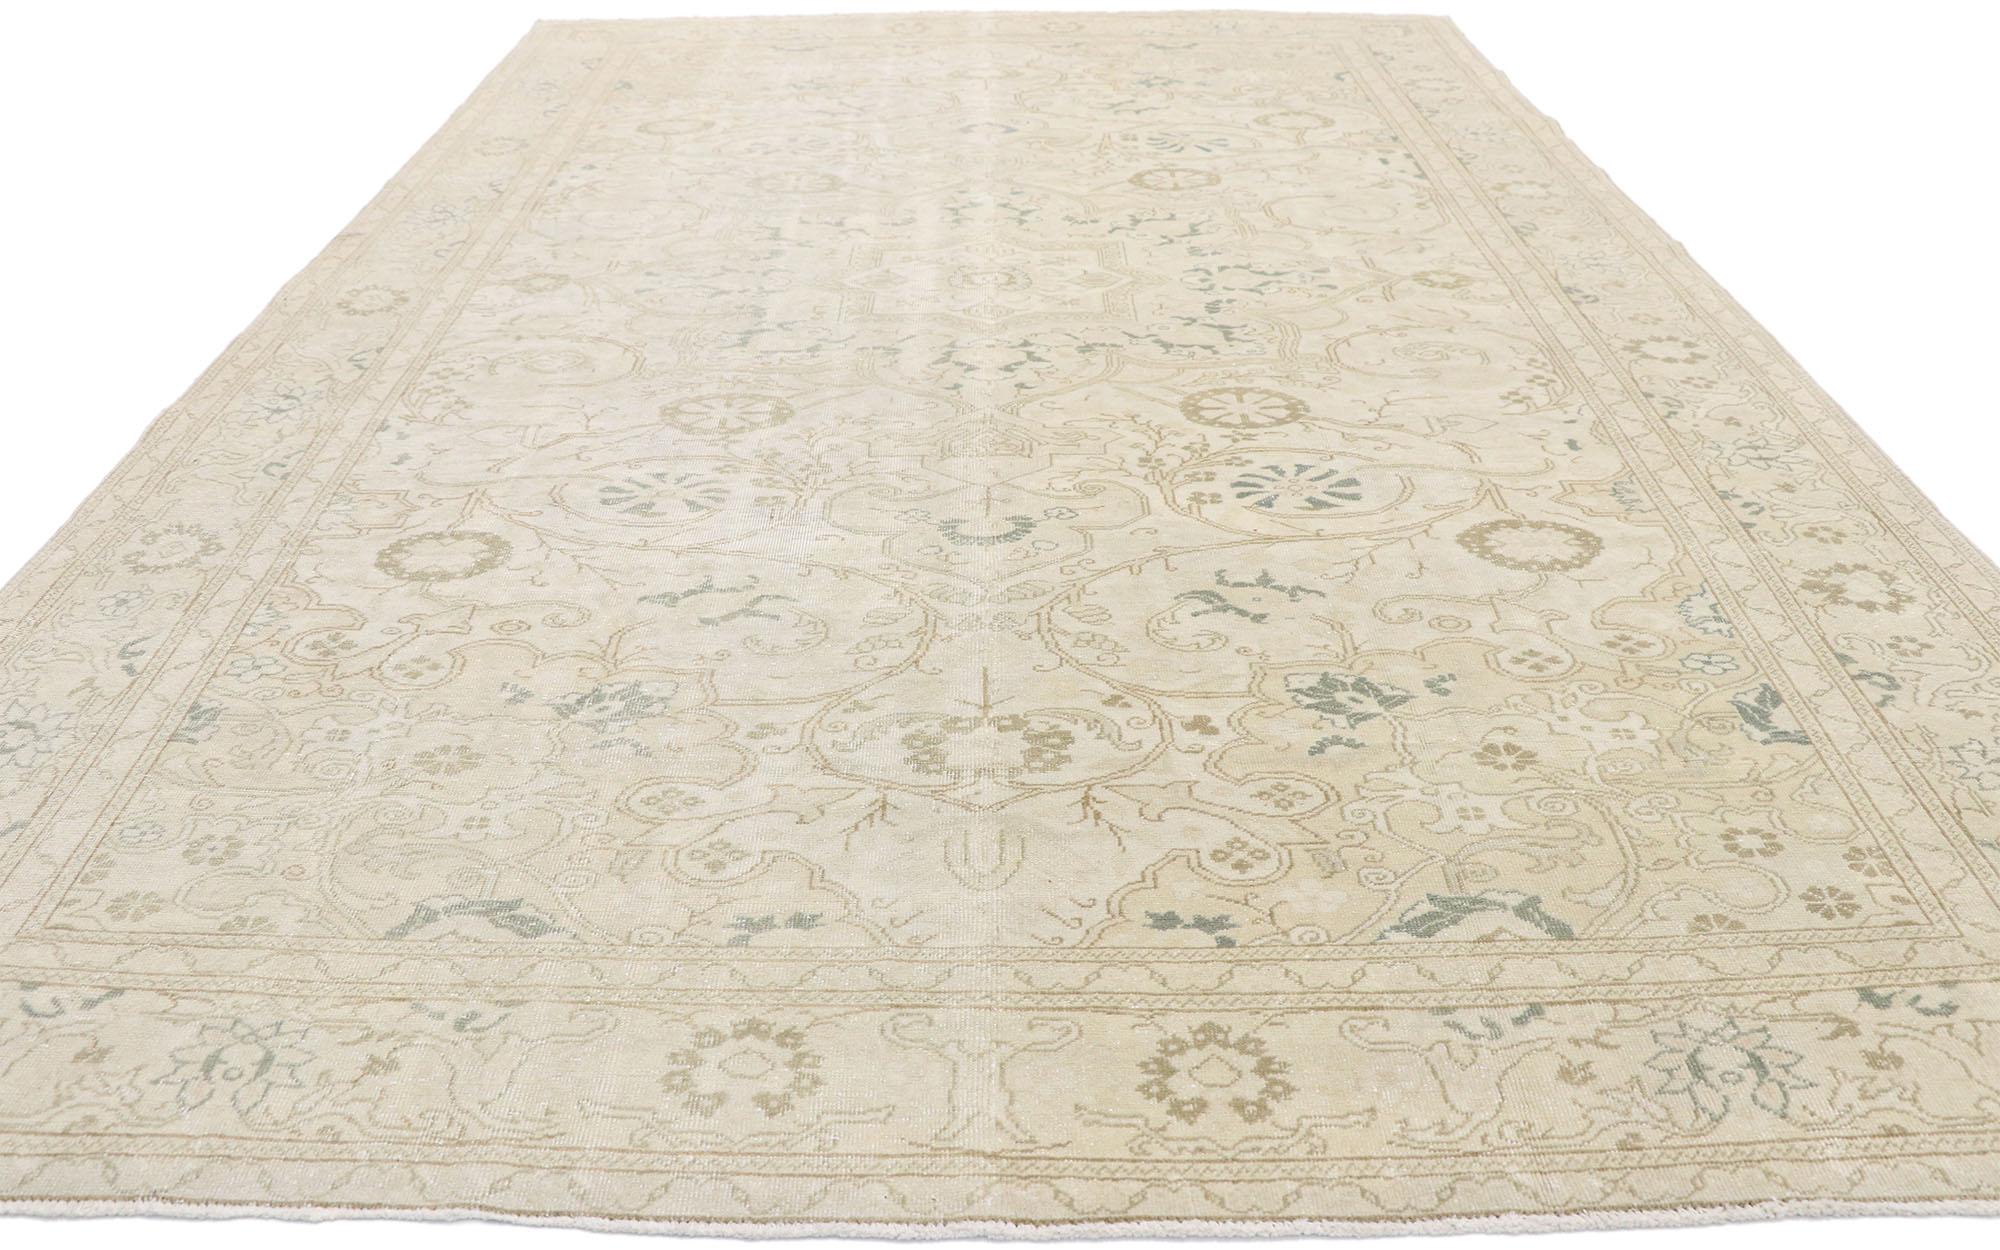 Tabriz Distressed Vintage Turkish Sivas Rug with Modern Rustic Cotswold Cottage Style